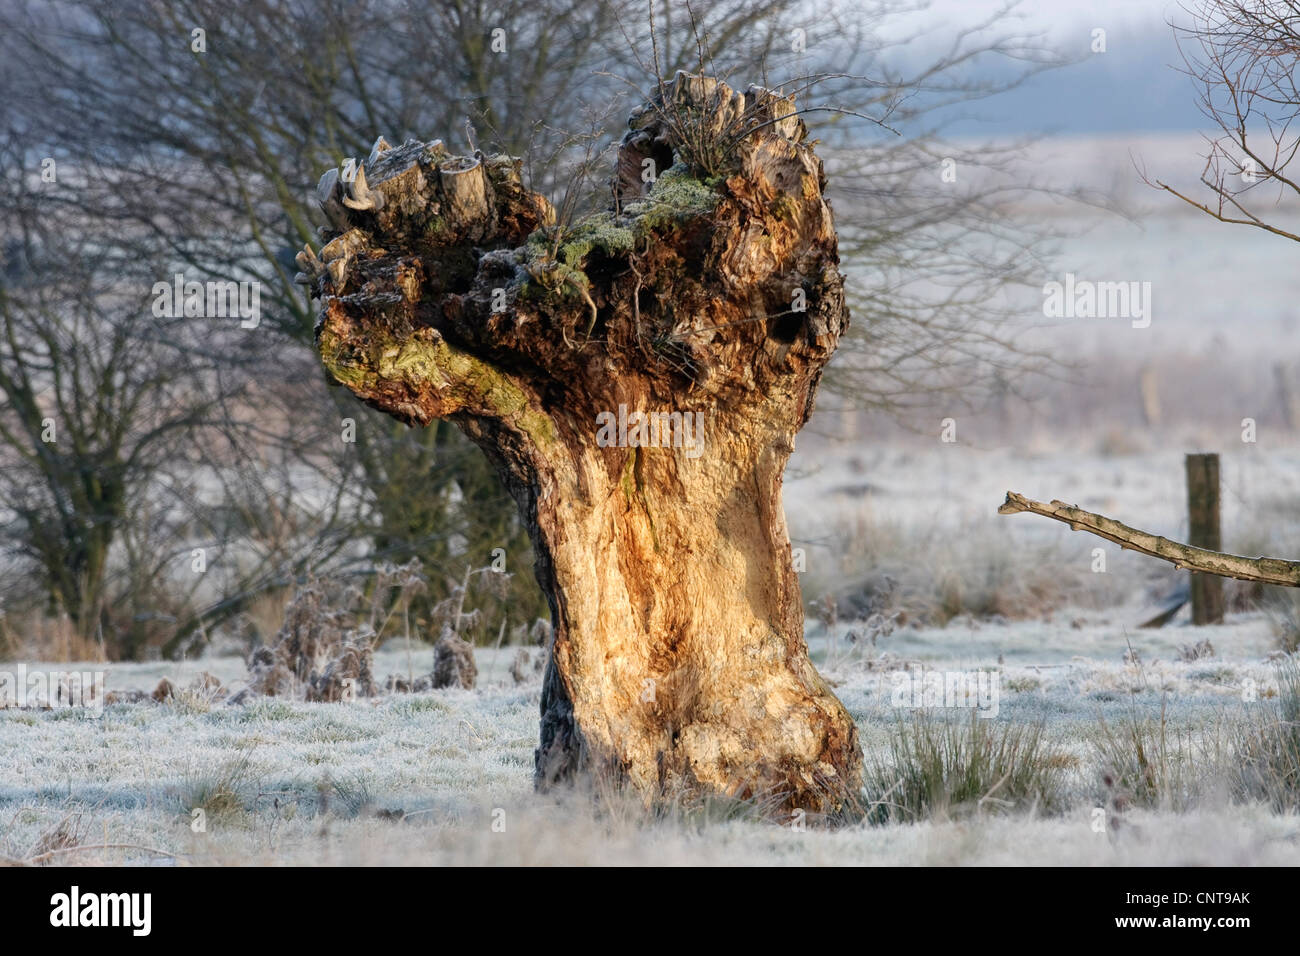 willow, osier (Salix spec.), leftovers of an old pollarded willow in a winter landscape, Germany Stock Photo